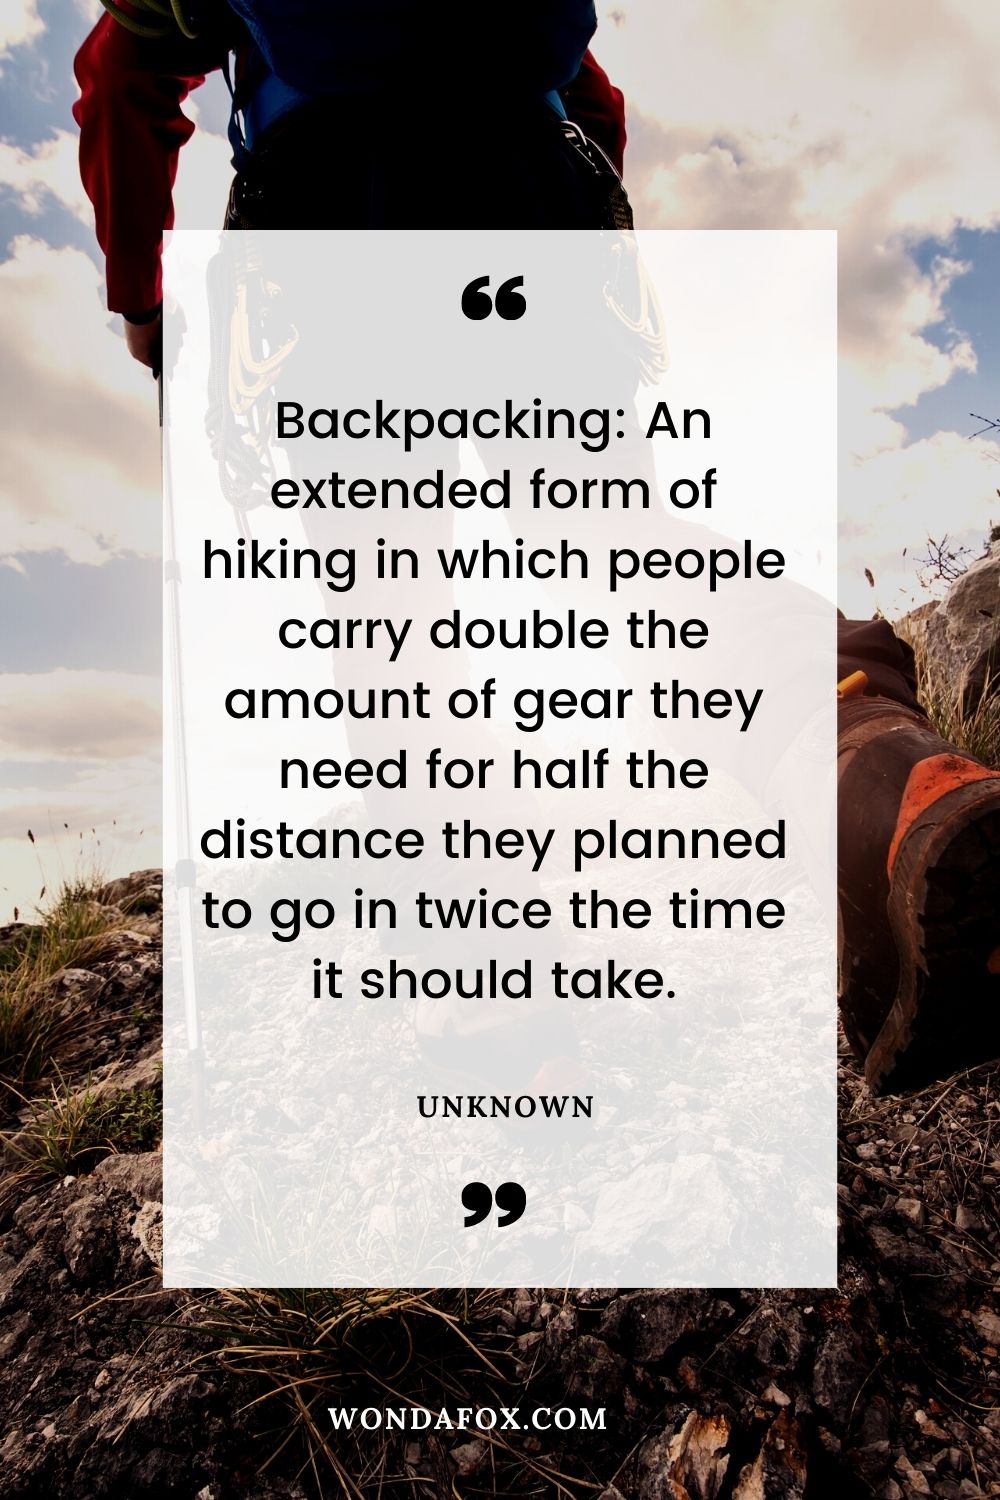 Backpacking: An extended form of hiking in which people carry double the amount of gear they need for half the distance they planned to go in twice the time it should take.